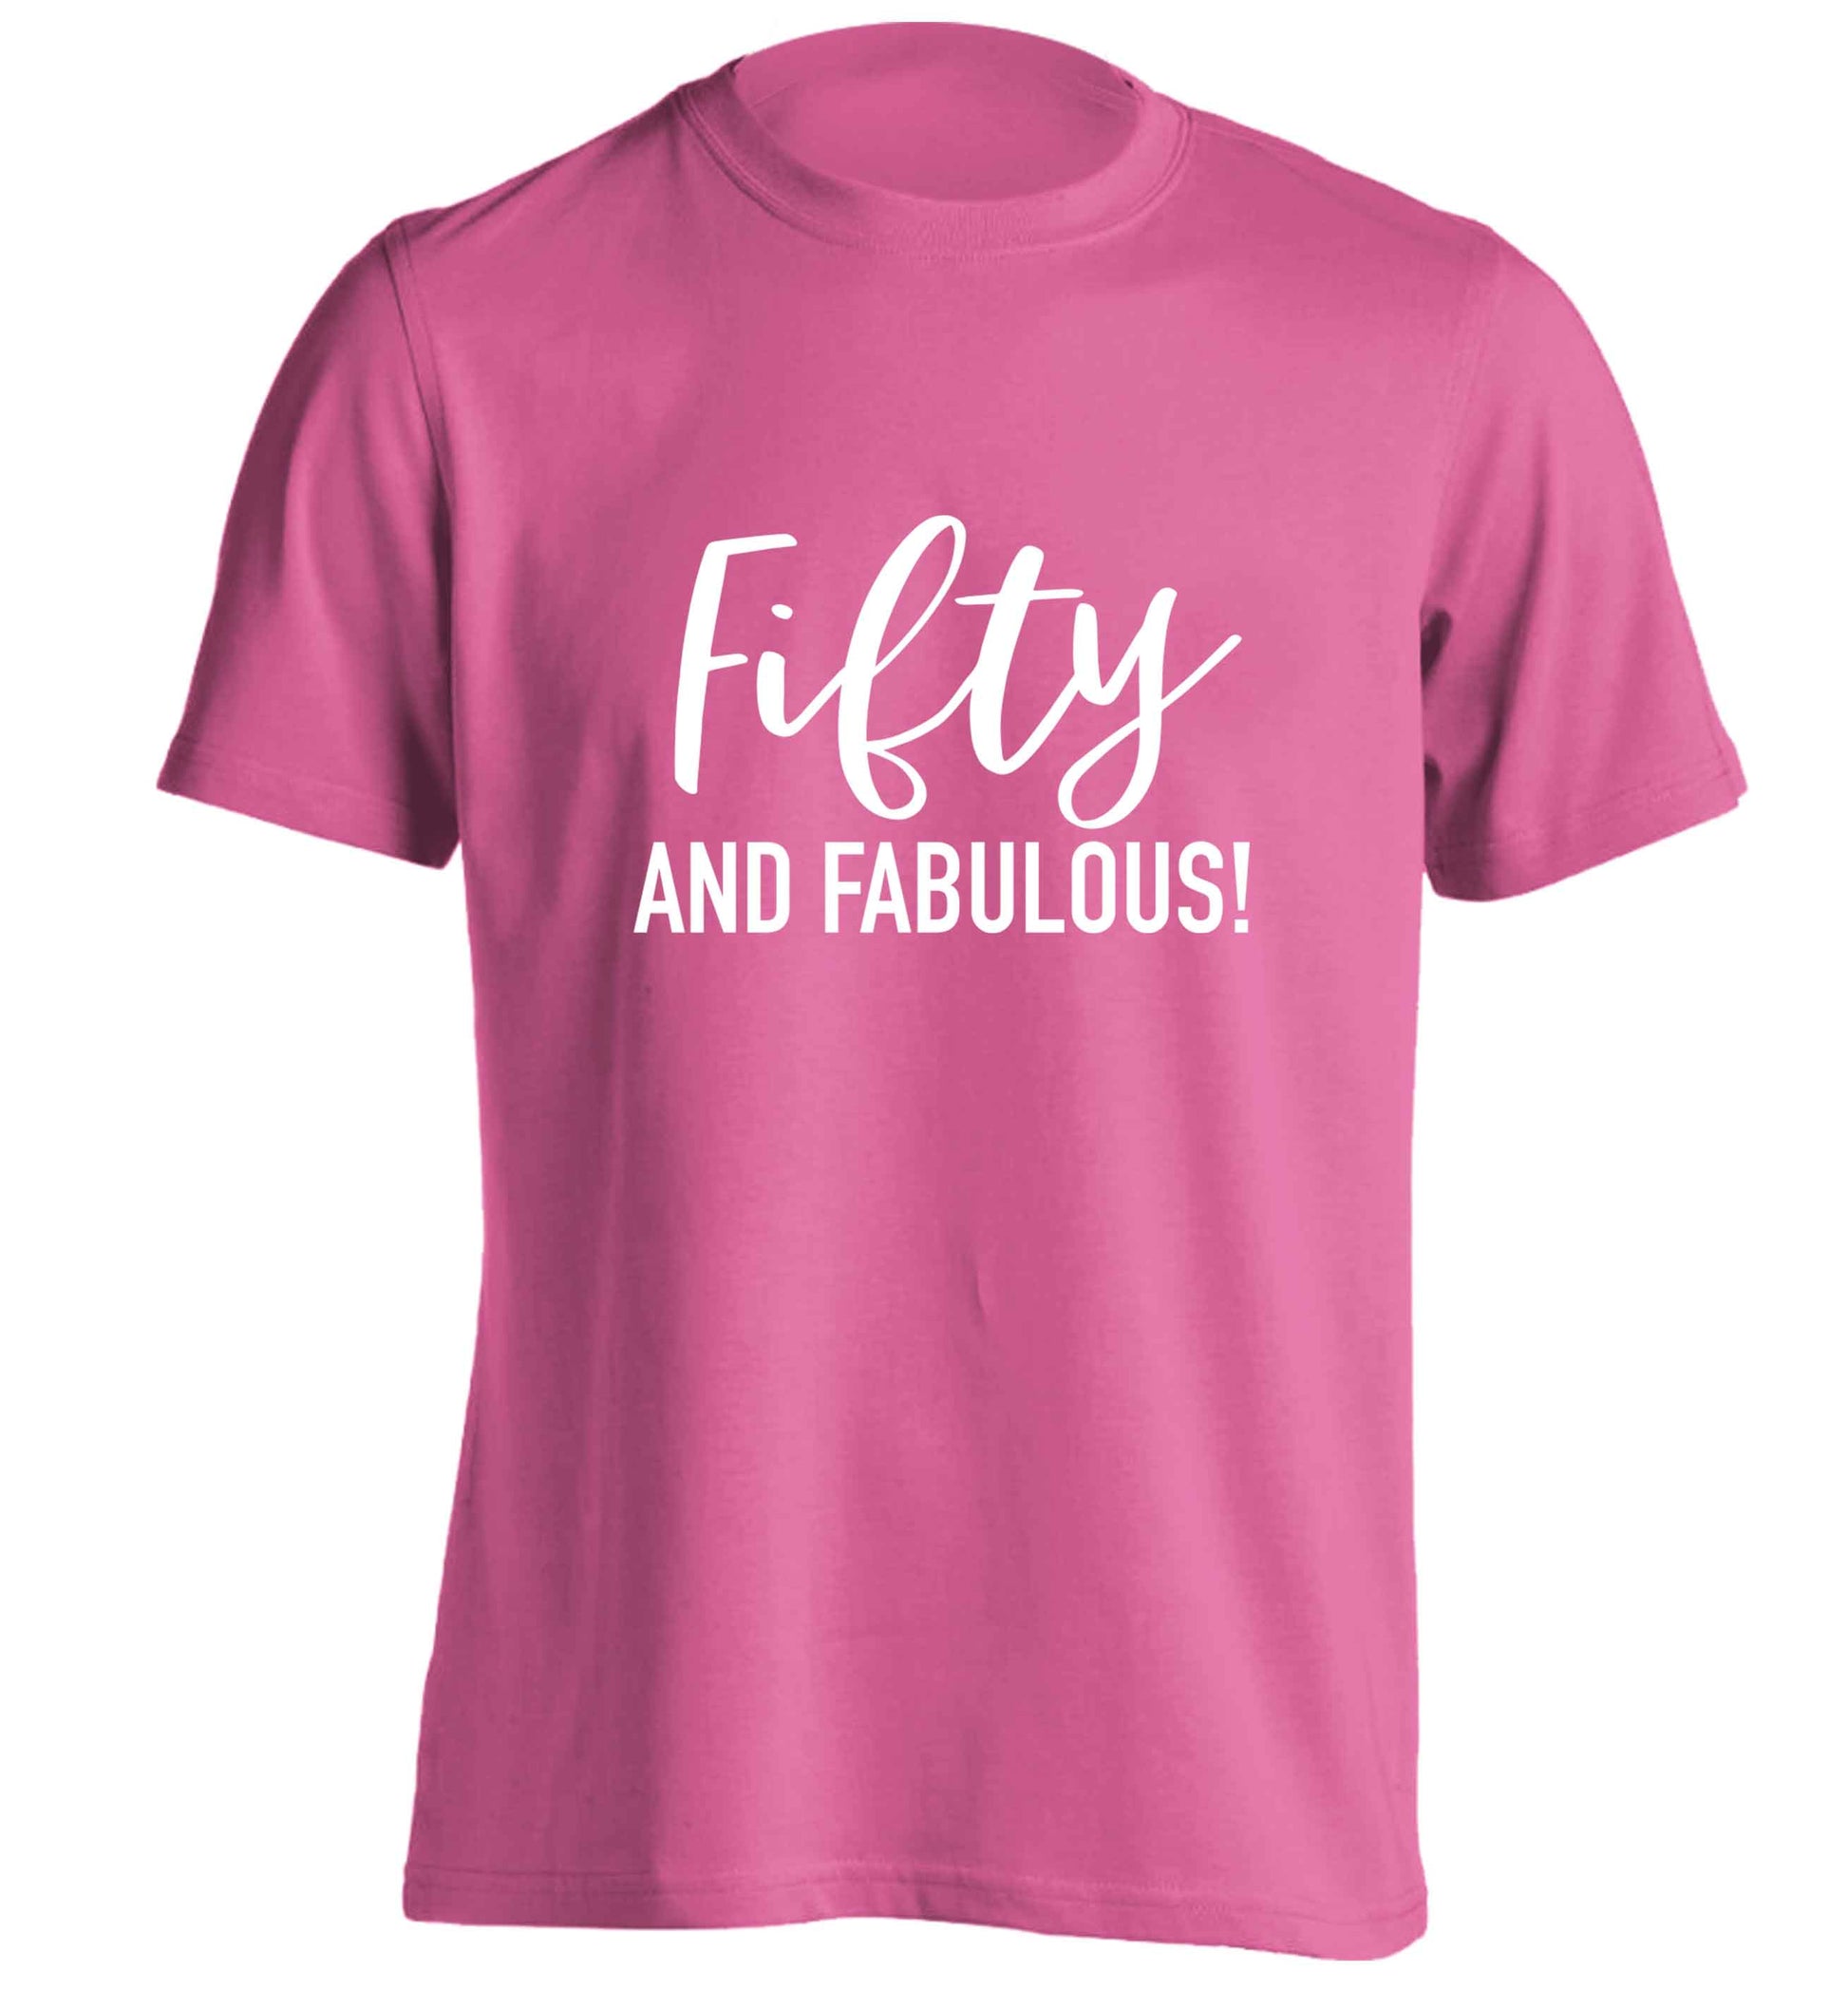 Fifty and fabulous adults unisex pink Tshirt 2XL